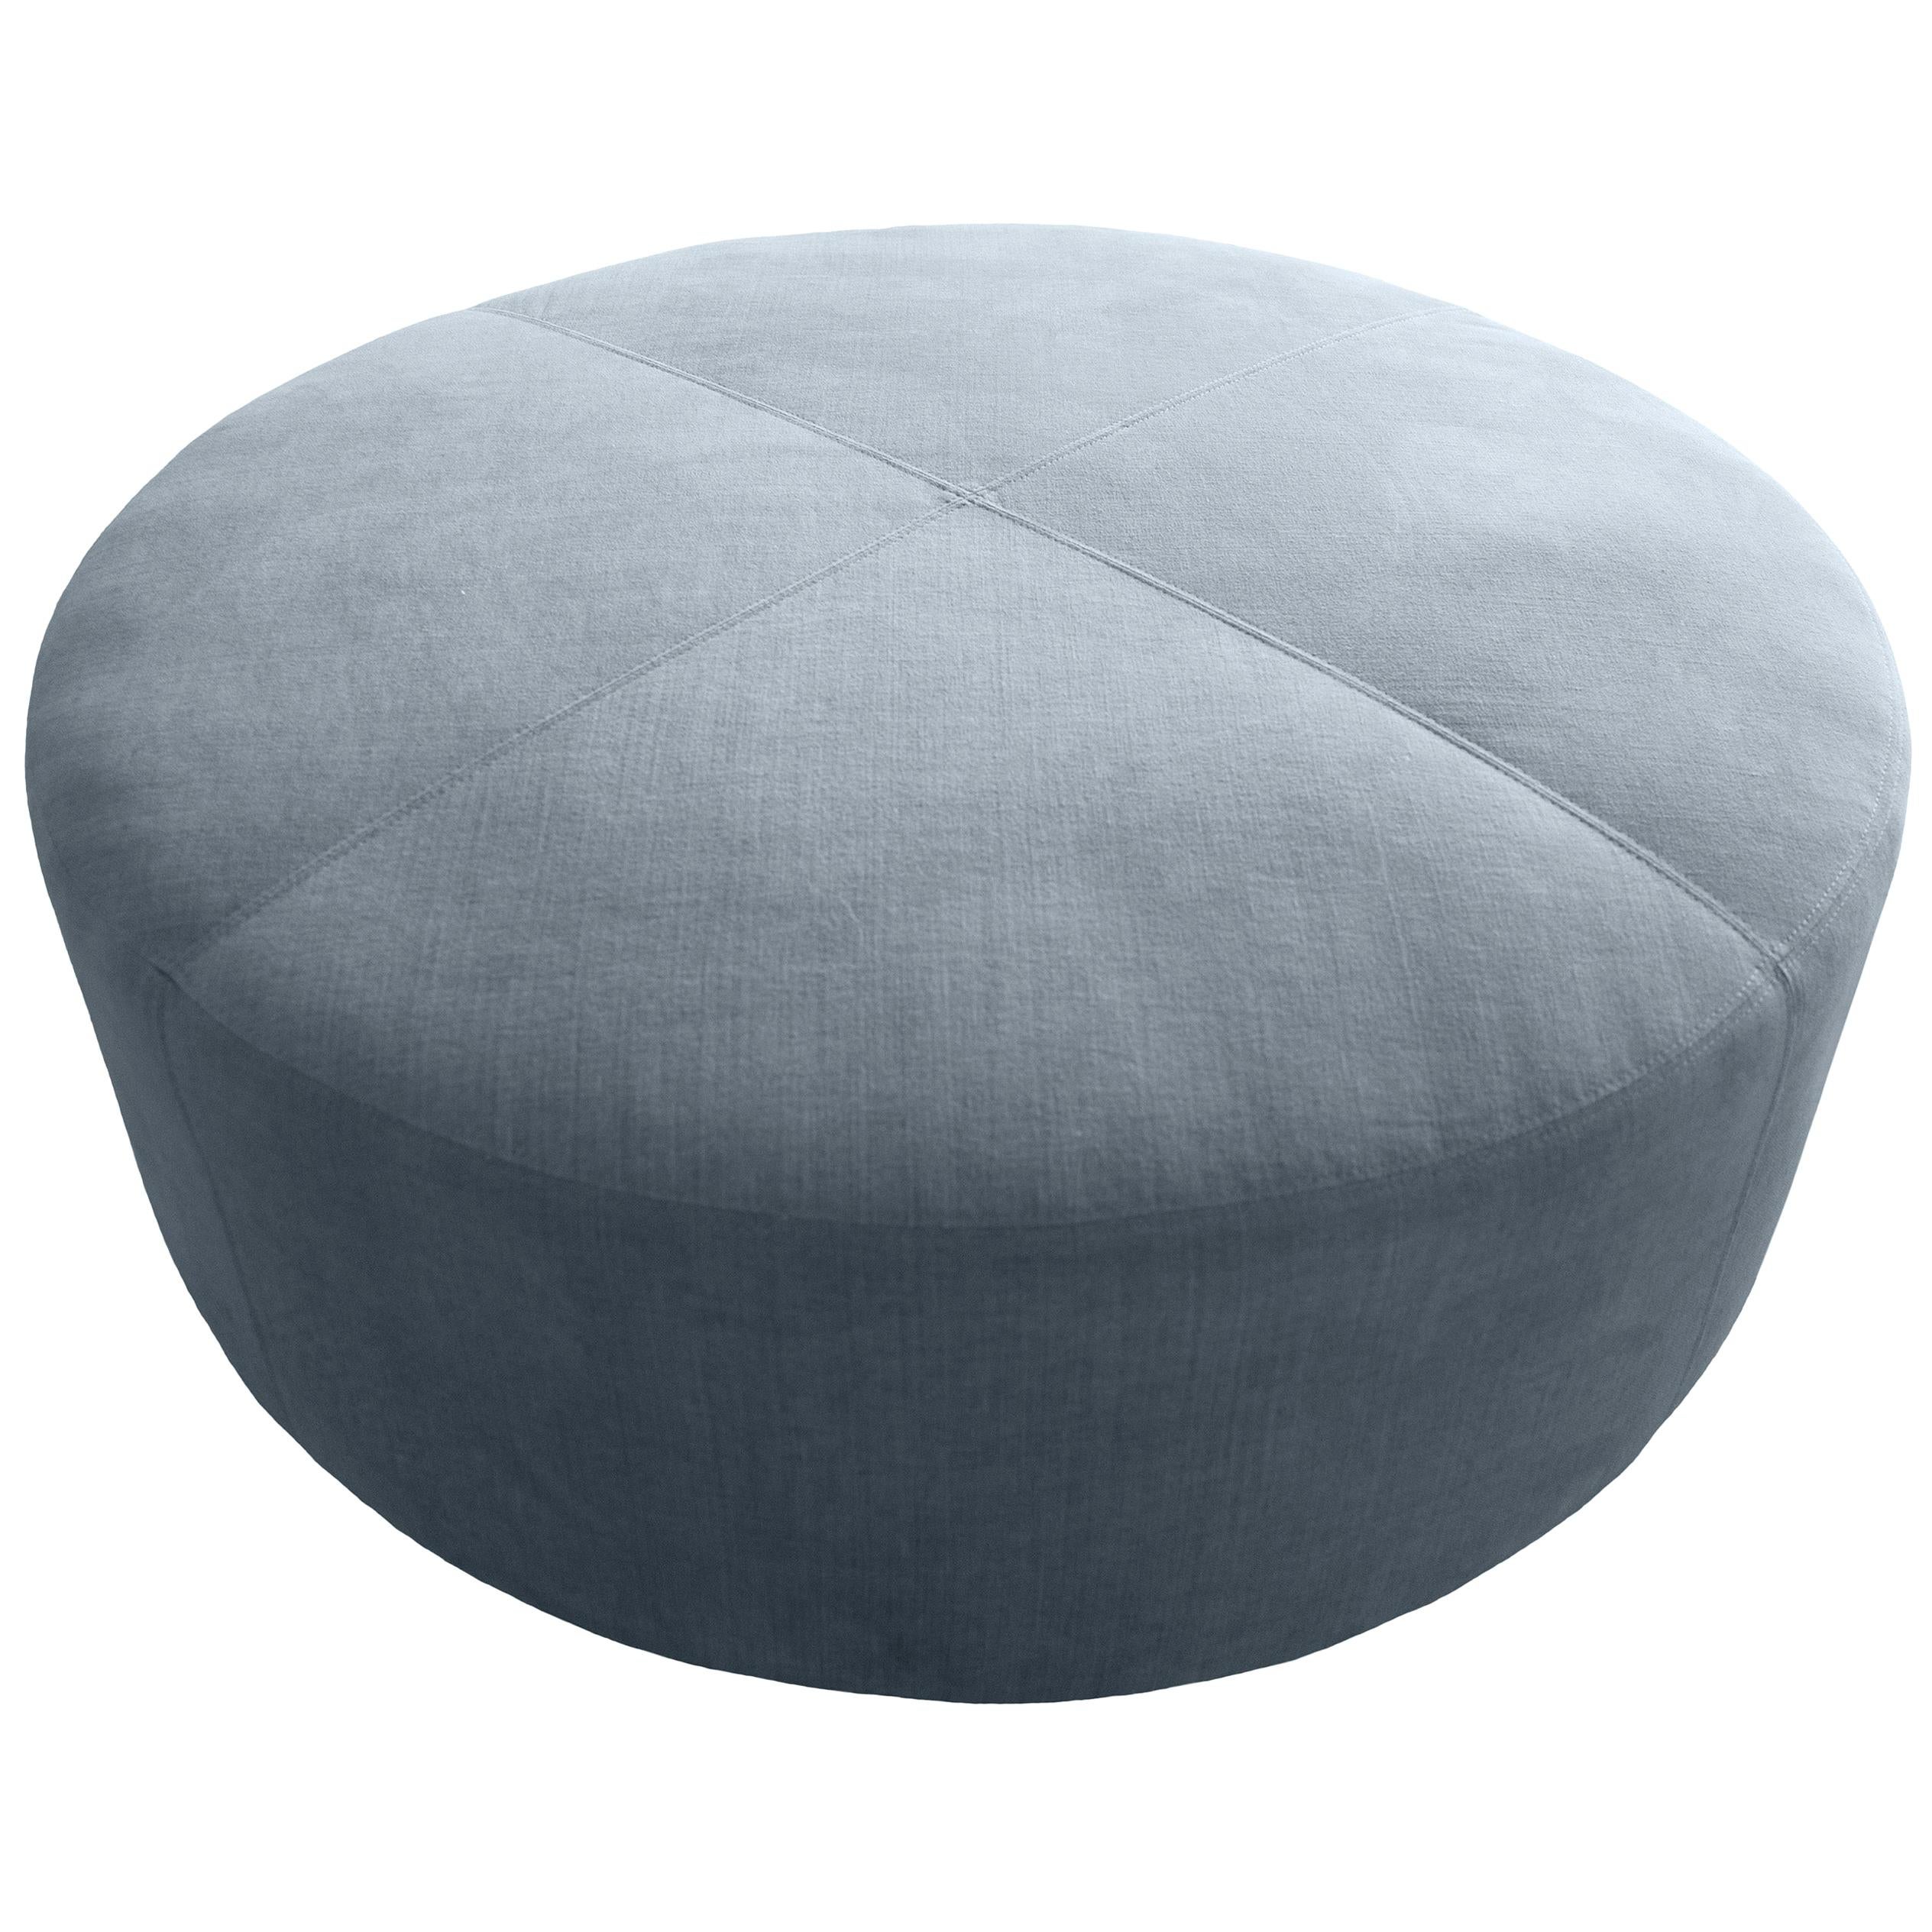 Luxurious Round Double Stitch Living Room Ottoman Foot Rest Table Handcrafted  For Sale